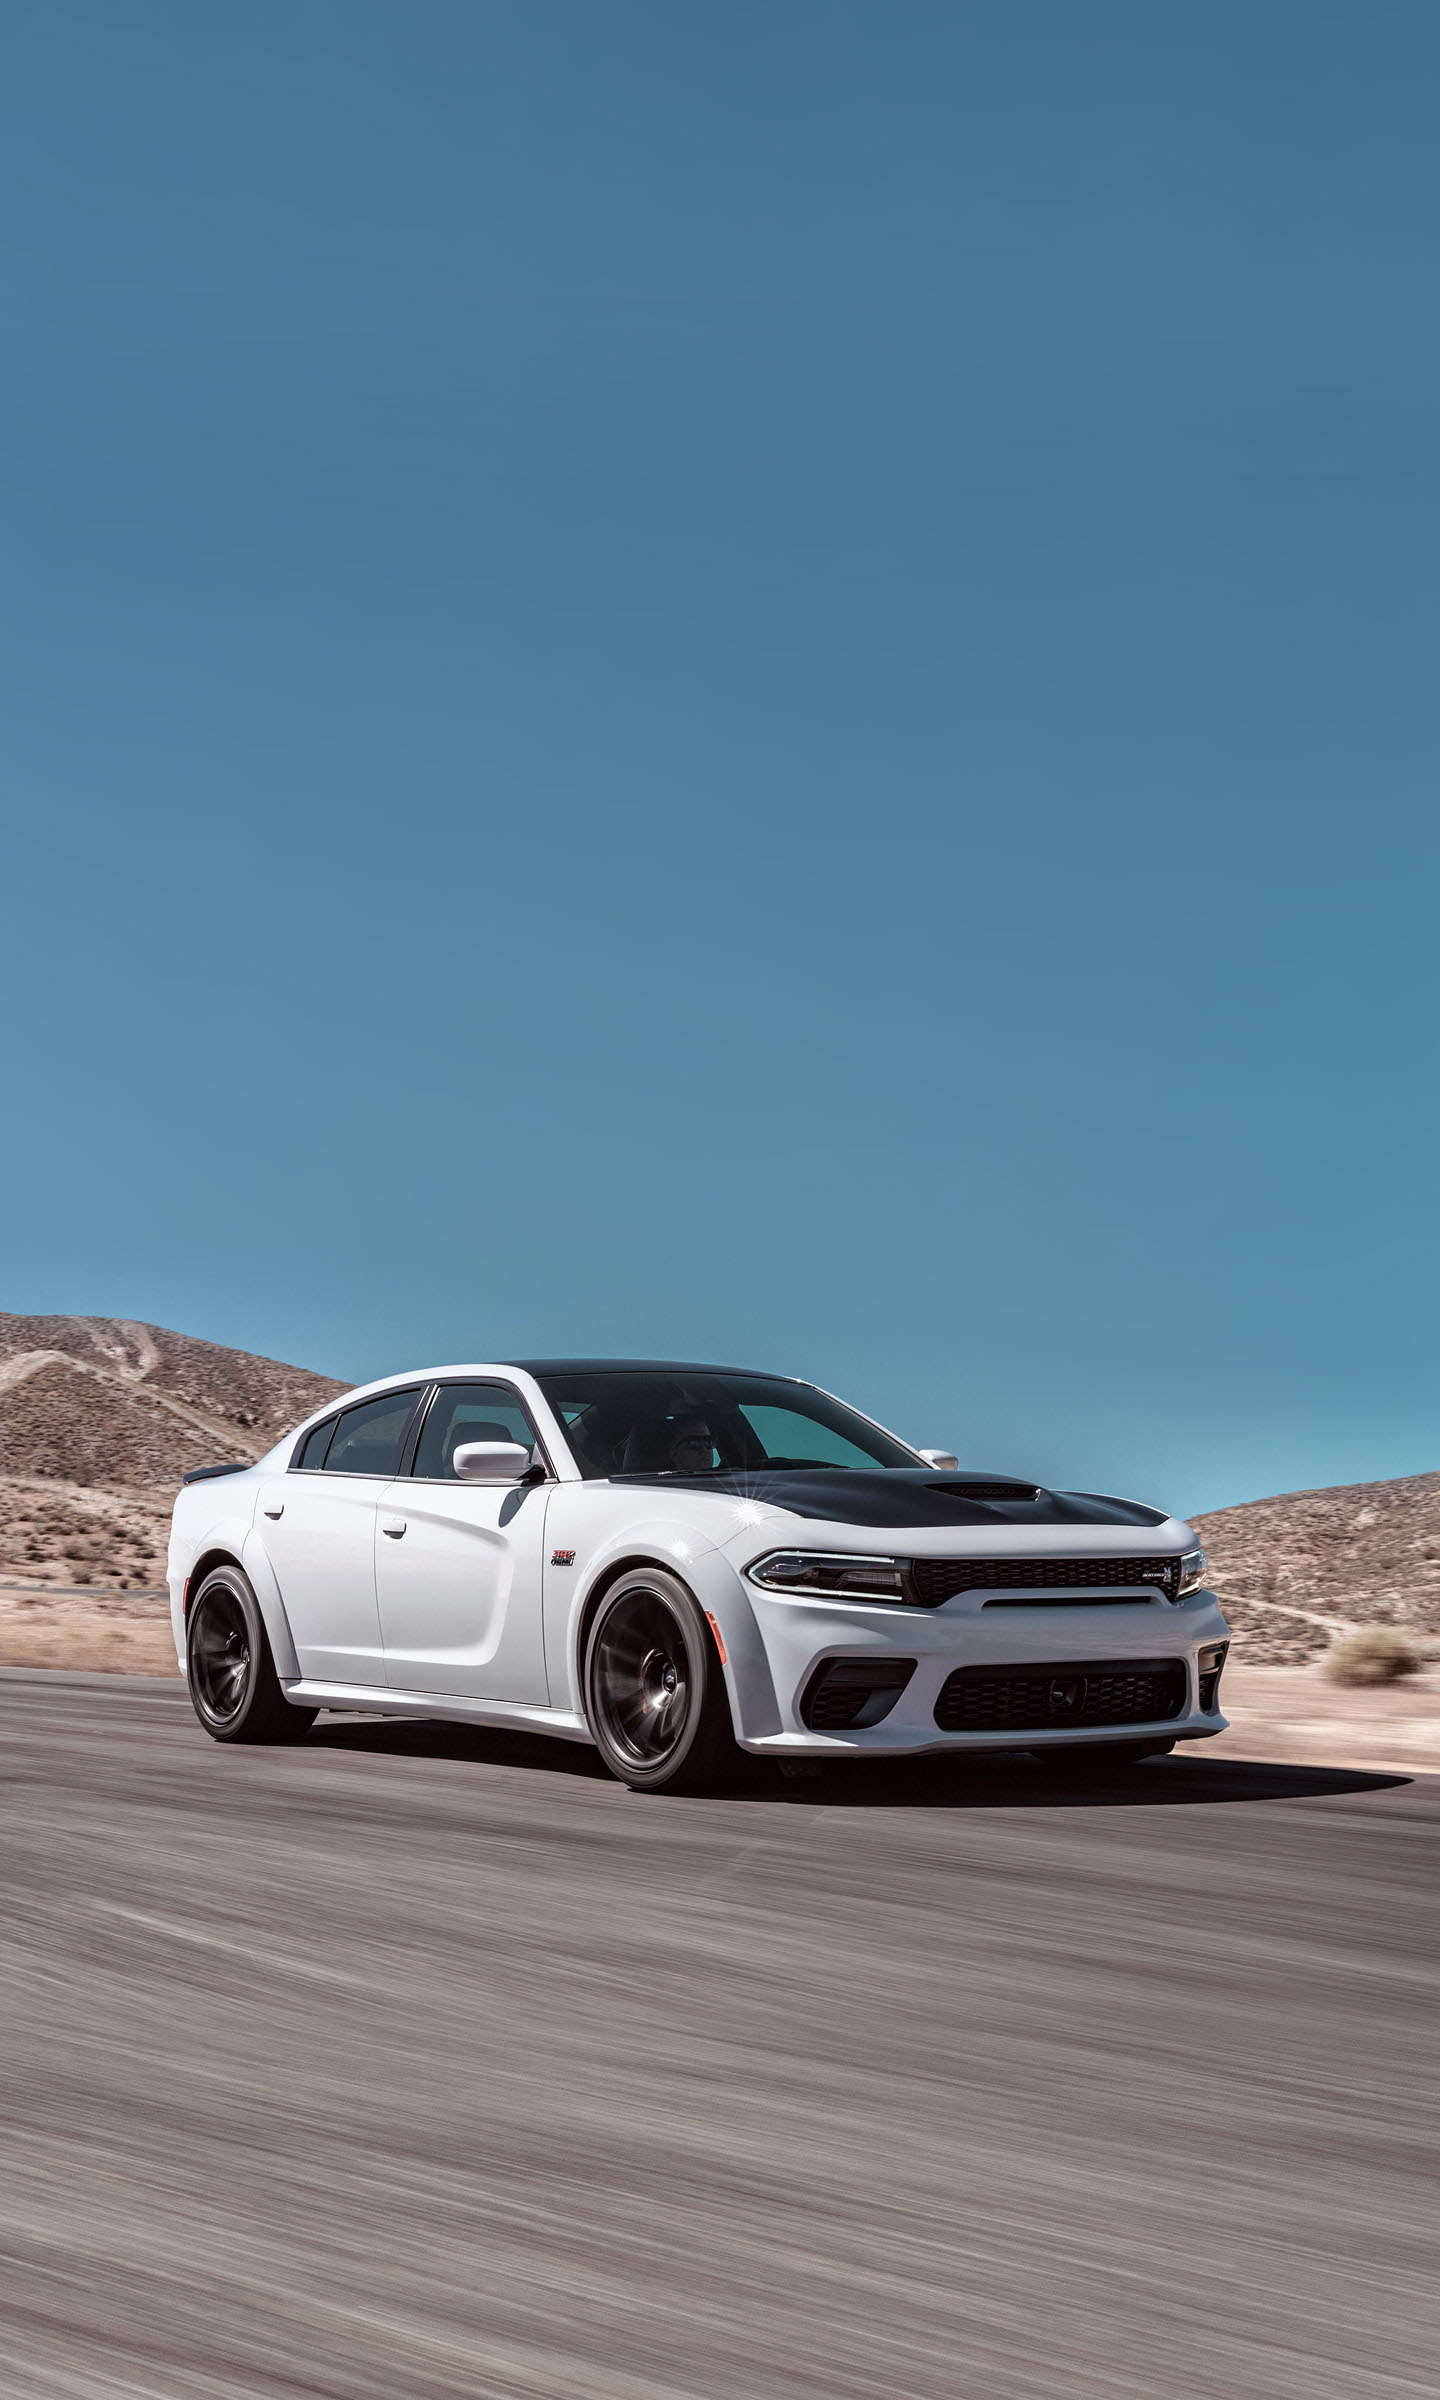  2020 Dodge Charger Scat Pack Widebody Wallpaper.